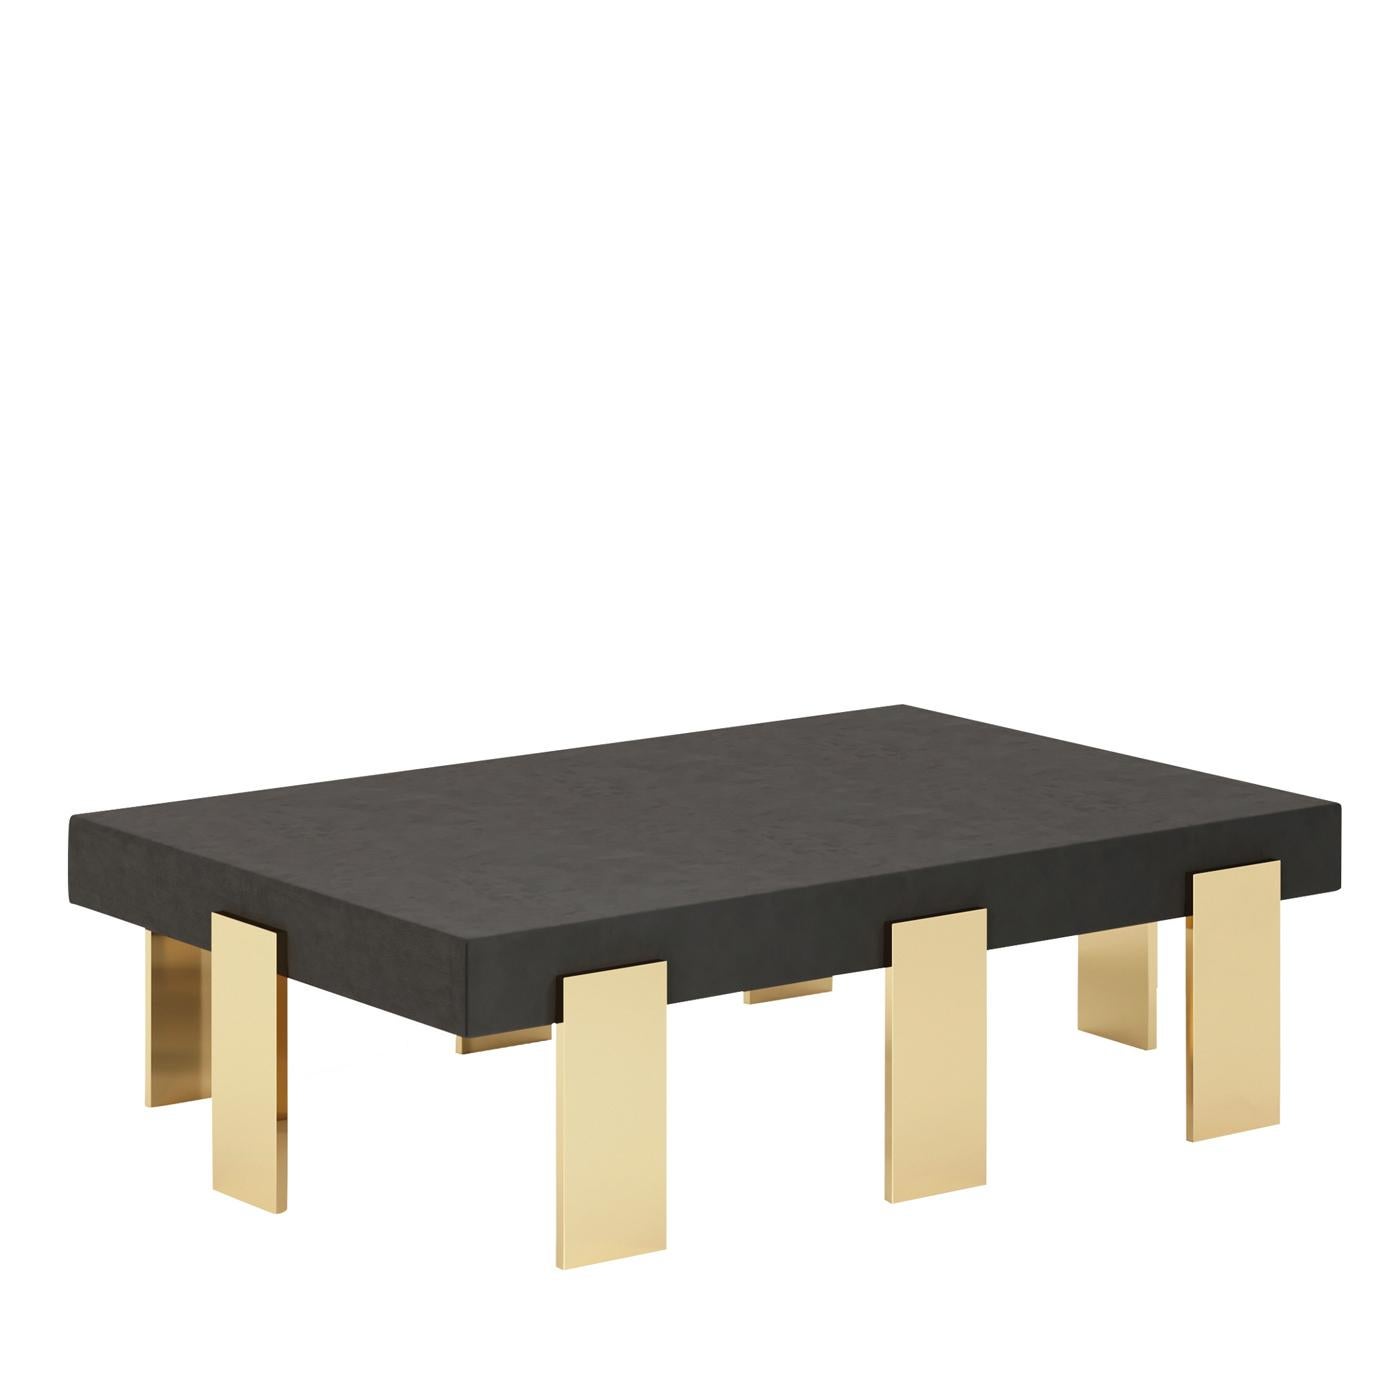 Splendid in its sculptural silhouette, this exquisite coffee table showcases a dark brown, solid wooden top that can be either lacquered in several color options, upholstered in fabric or leather, or painted in different wood finishes. The wide and